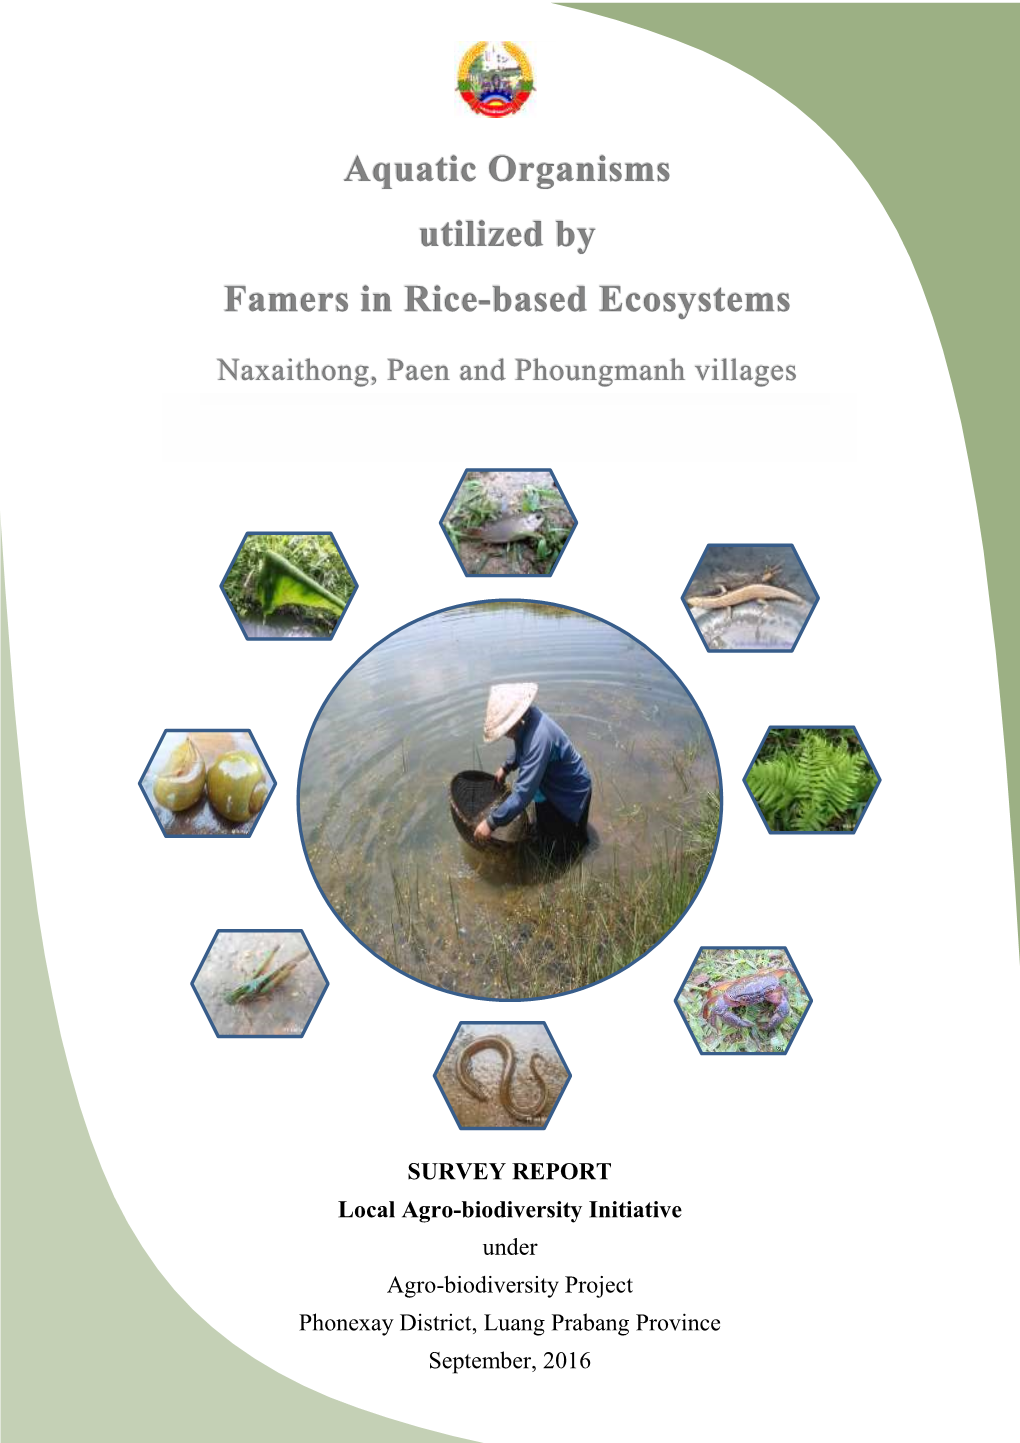 SURVEY REPORT Local Agro-Biodiversity Initiative Under Agro-Biodiversity Project Phonexay District, Luang Prabang Province September, 2016